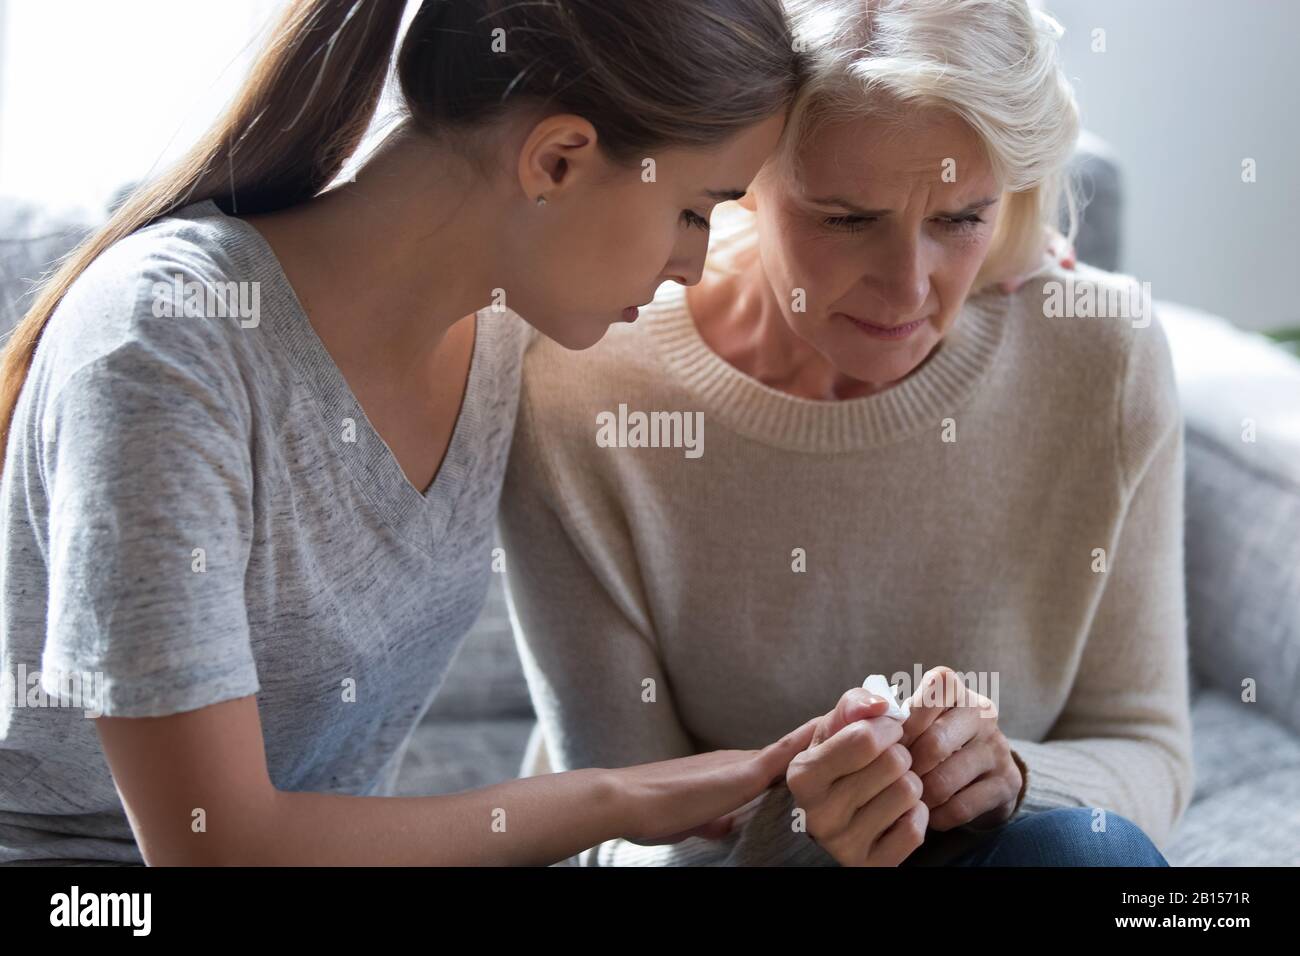 Worrying millennial lady sitting next to upset frustrated mommy. Stock Photo